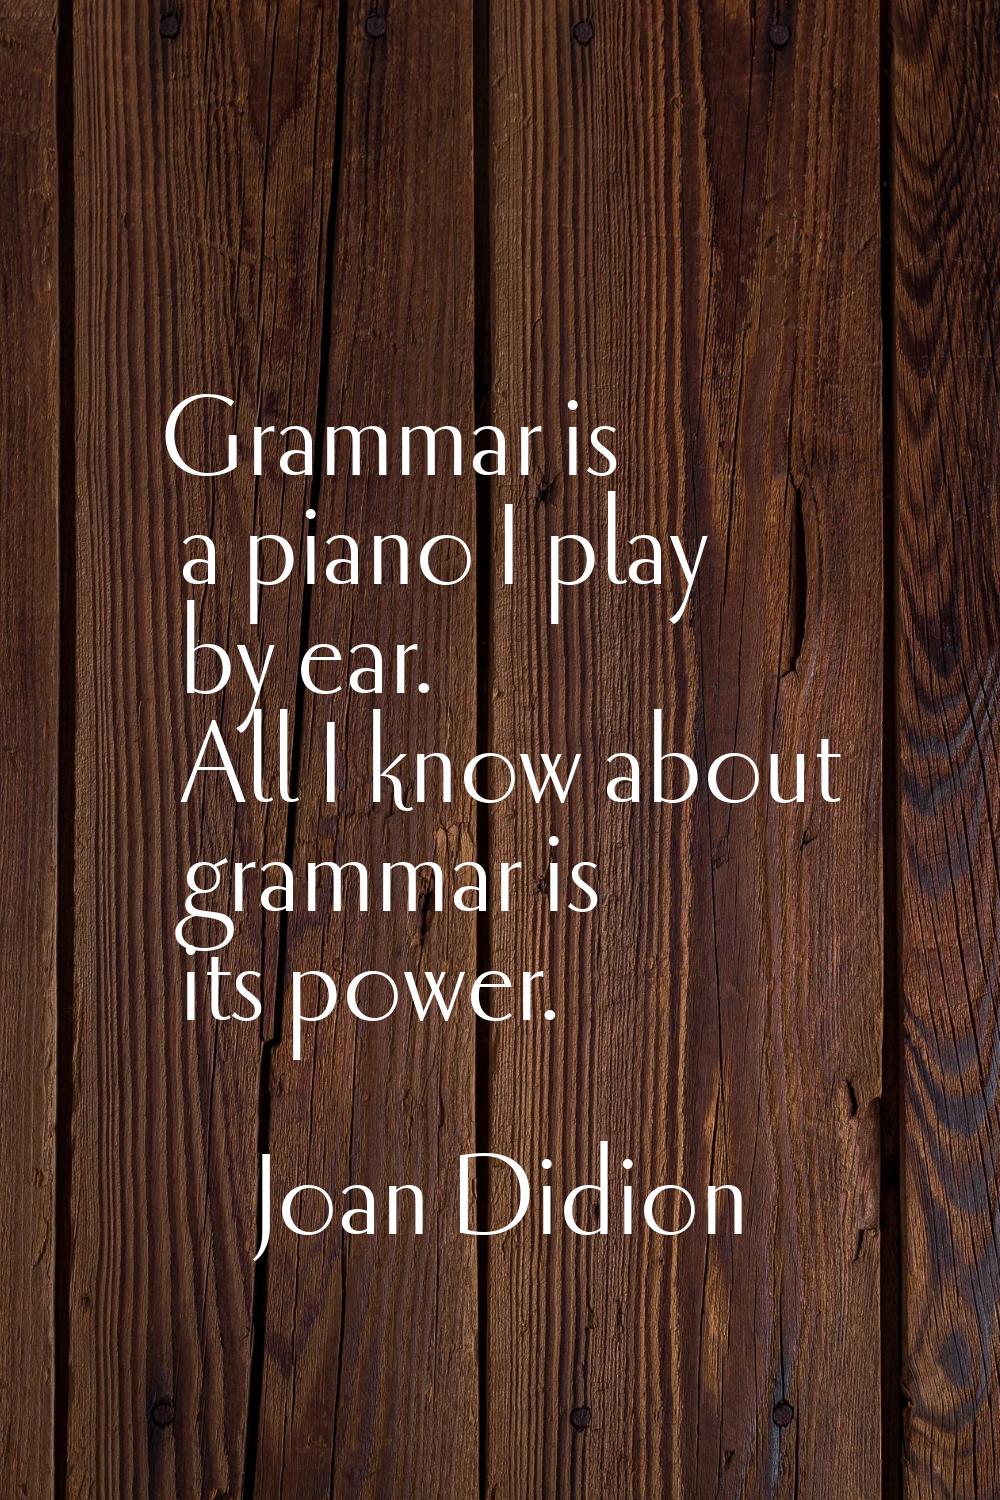 Grammar is a piano I play by ear. All I know about grammar is its power.